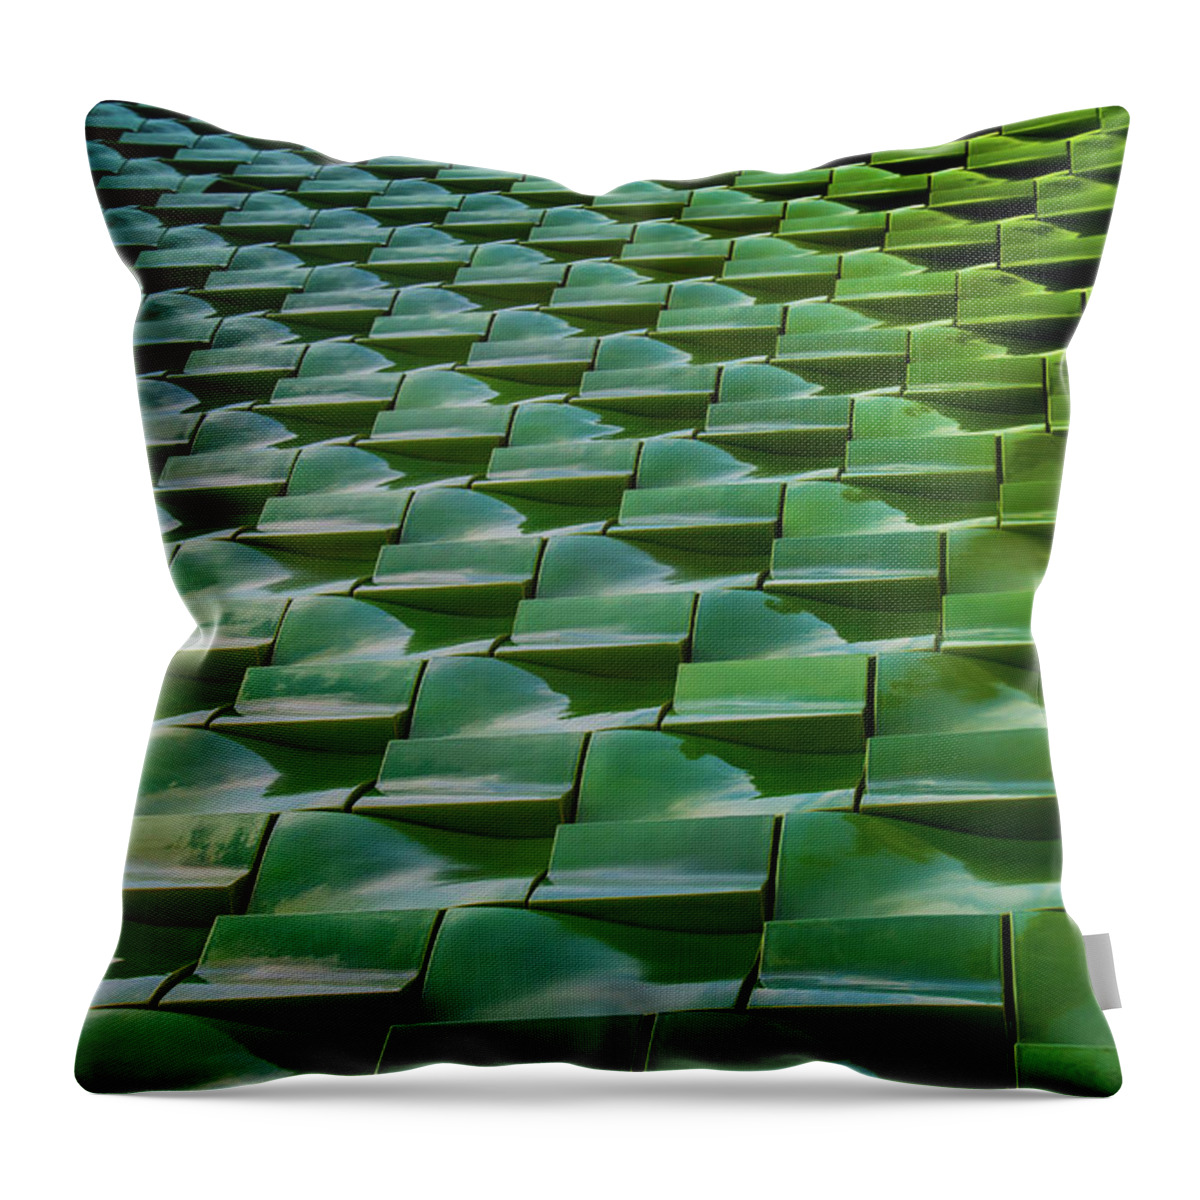 Tile Throw Pillow featuring the photograph Tile by Richard Goldman